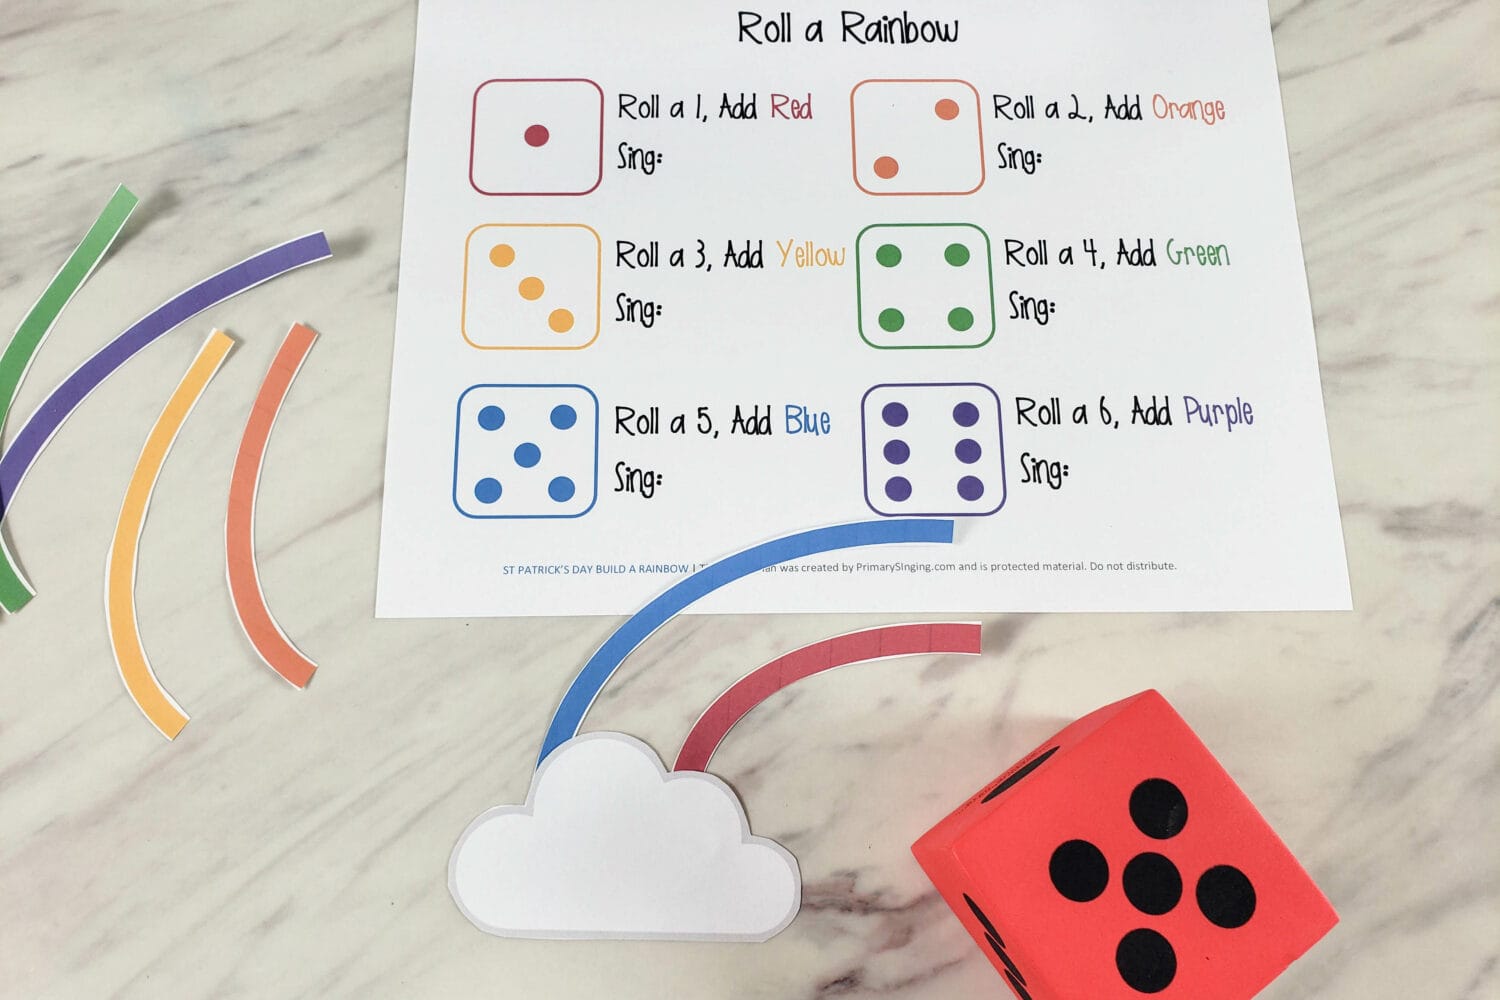 St Patrick's Day Singing Time Ideas - Printable Roll a Rainbow dice game for Primary and classroom use